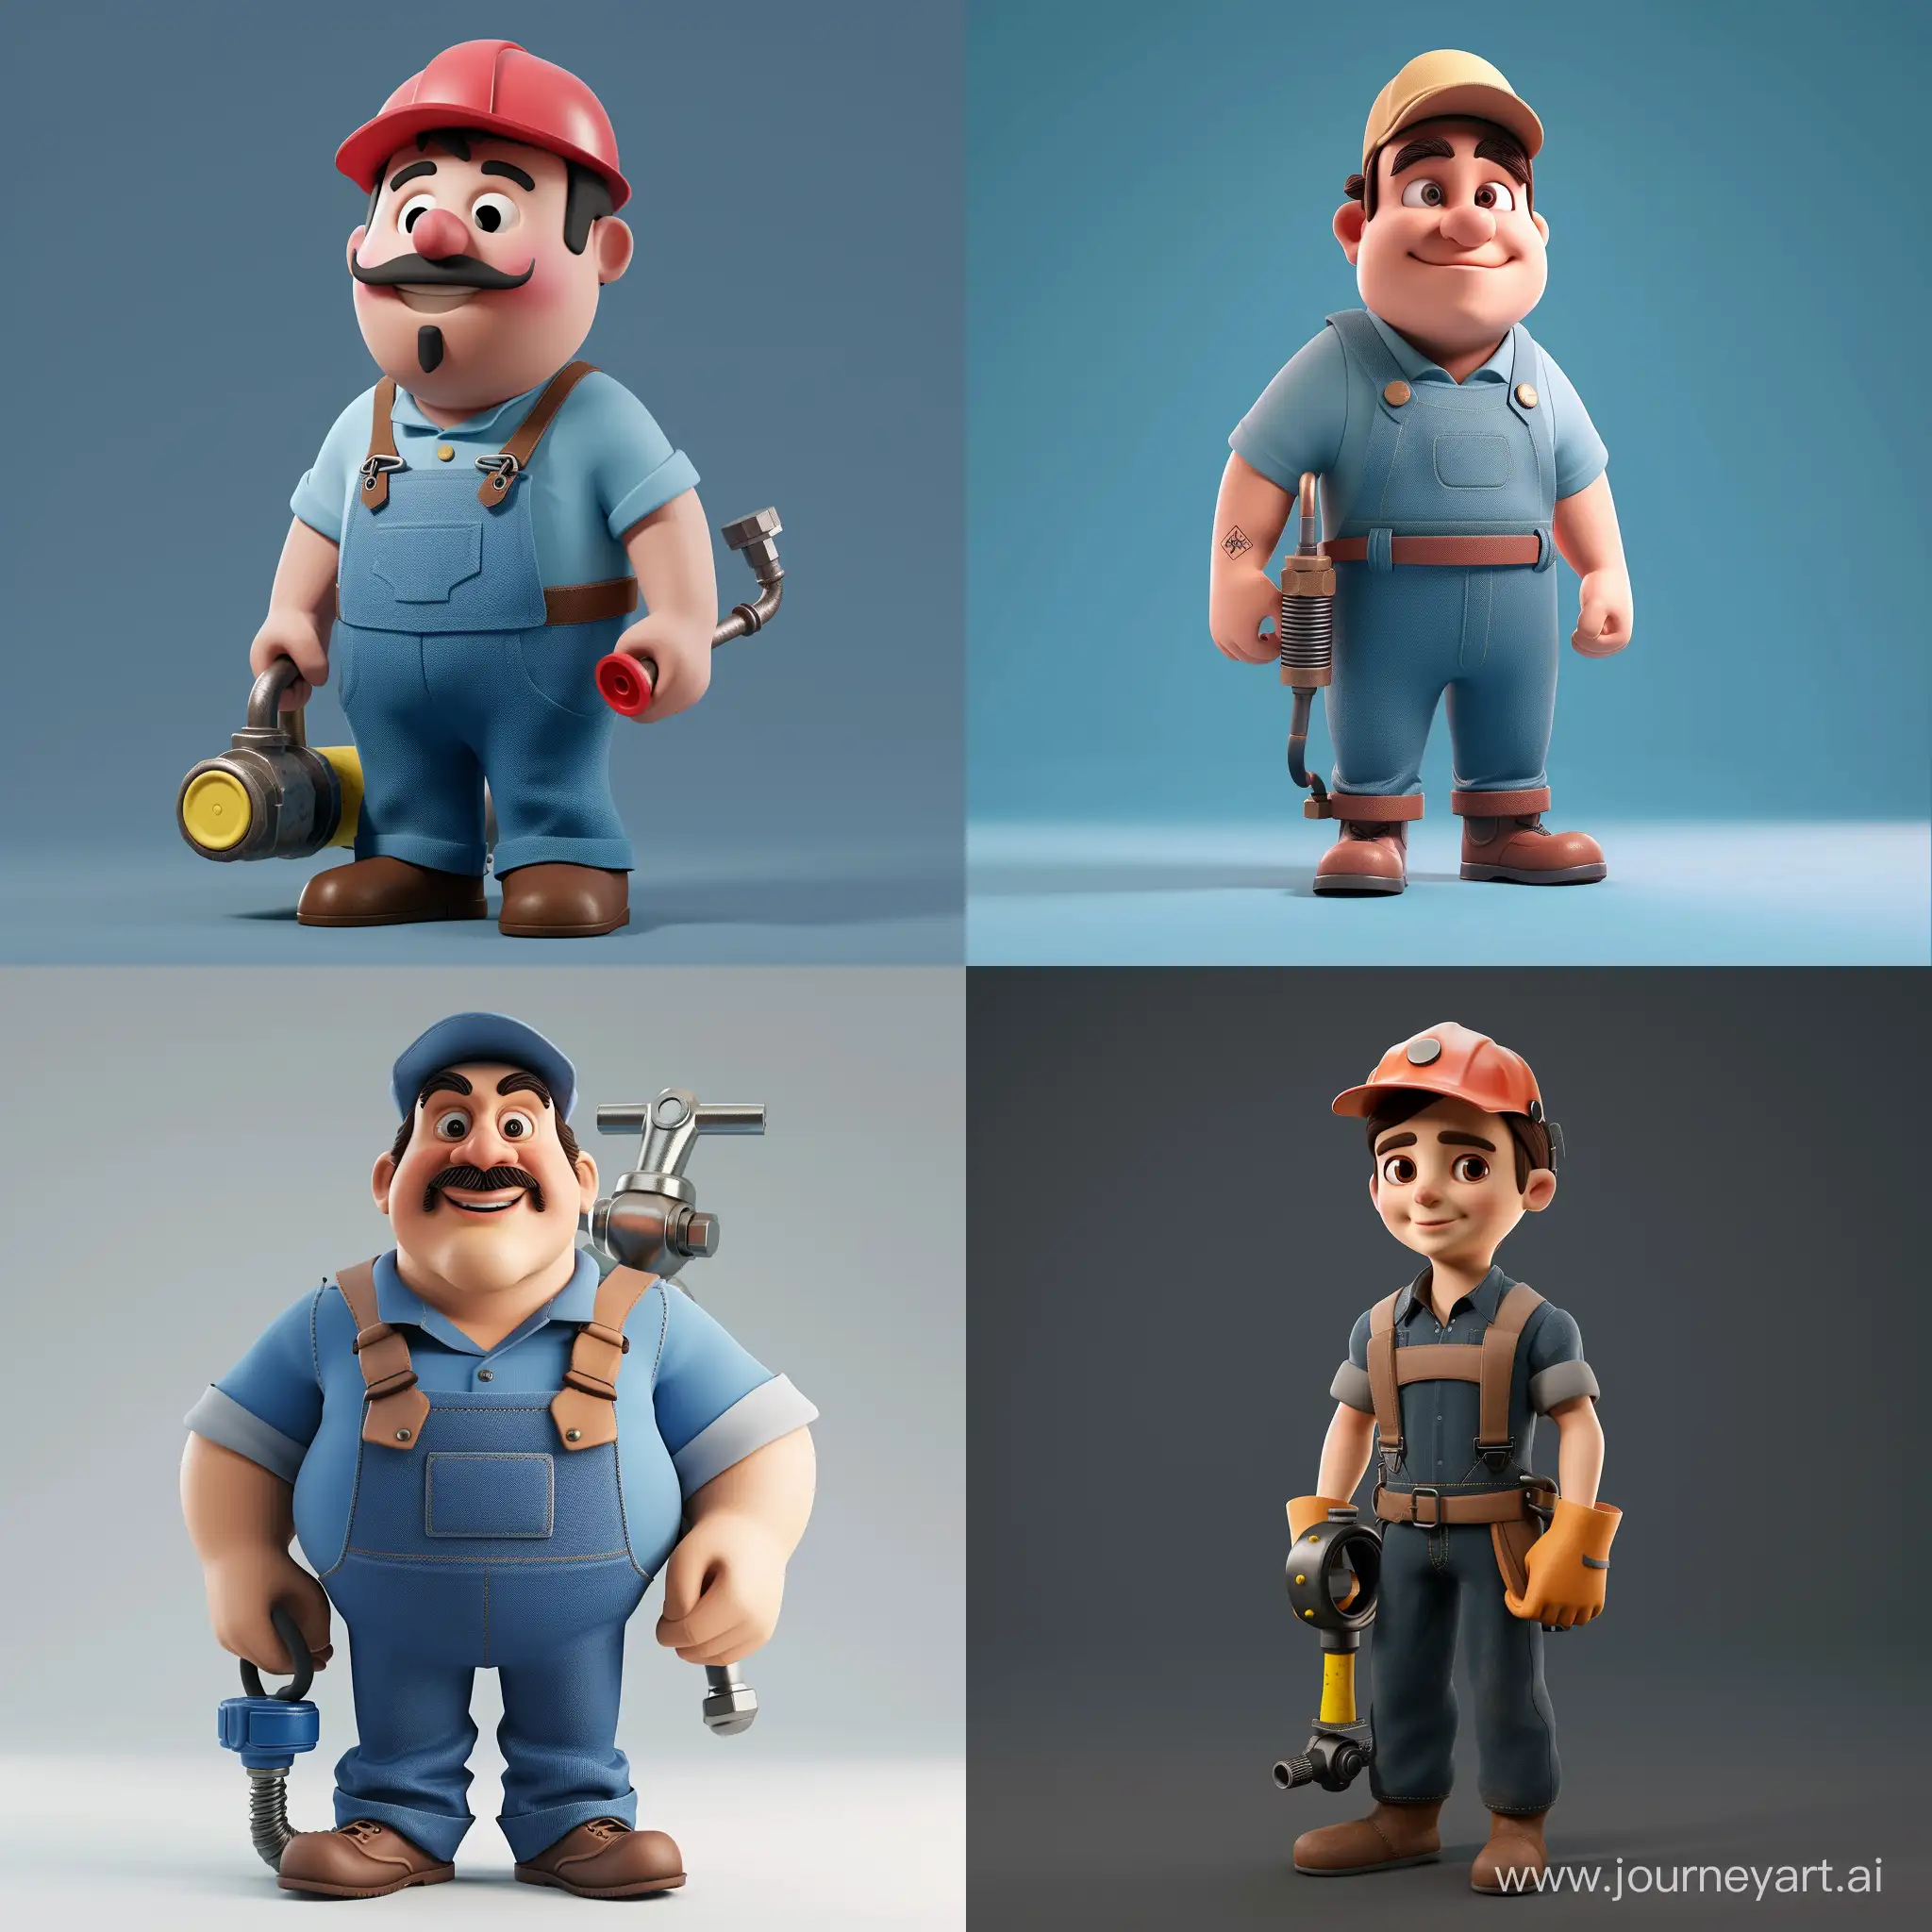 Cheerful-3D-Cartoon-Plumber-Fixing-Pipes-with-Tools